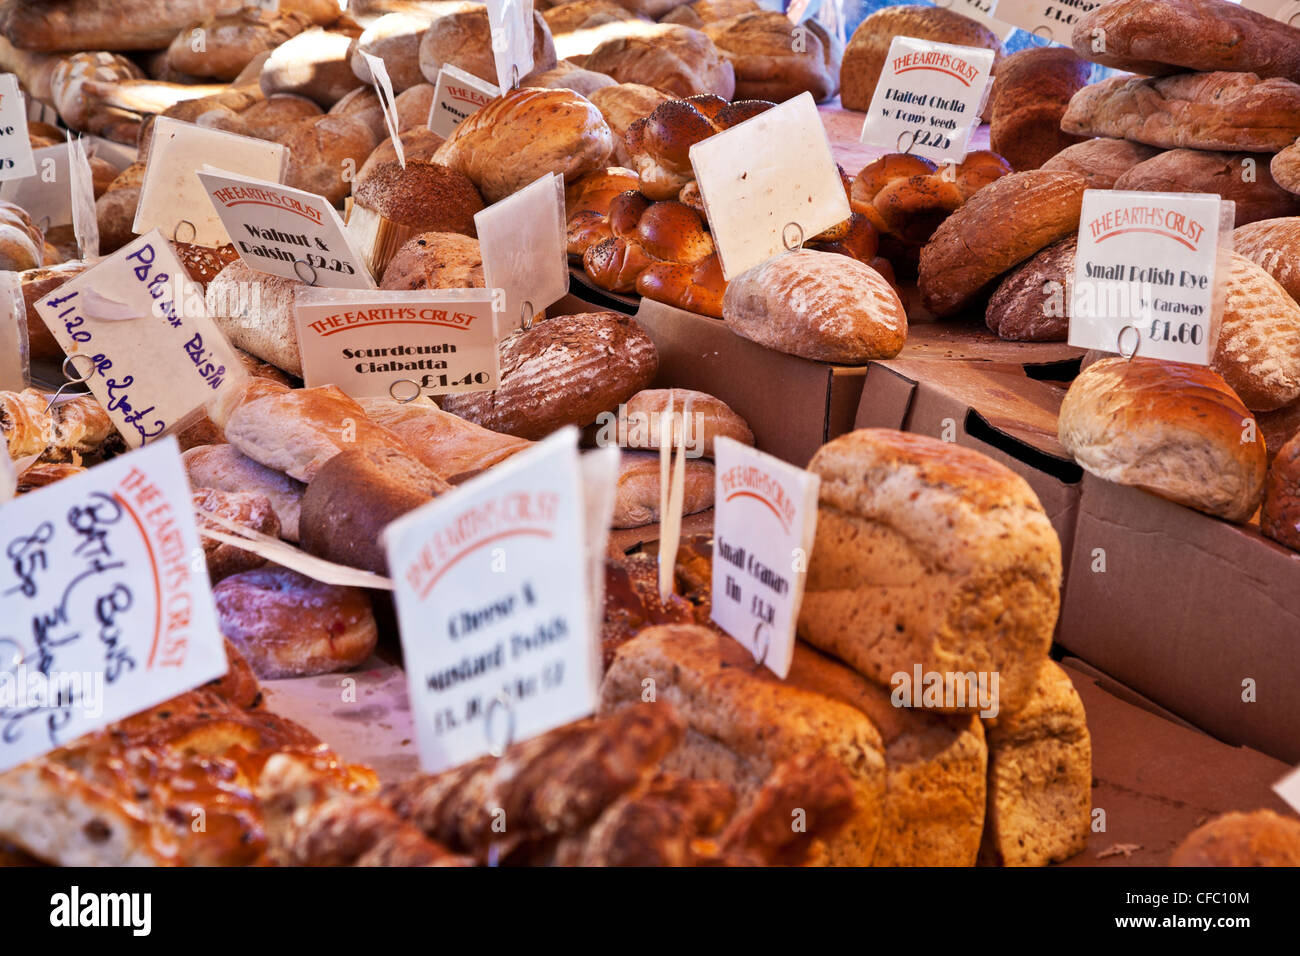 Speciality breads on a bakery stall in the Market Square, Cambridge, England, UK Stock Photo